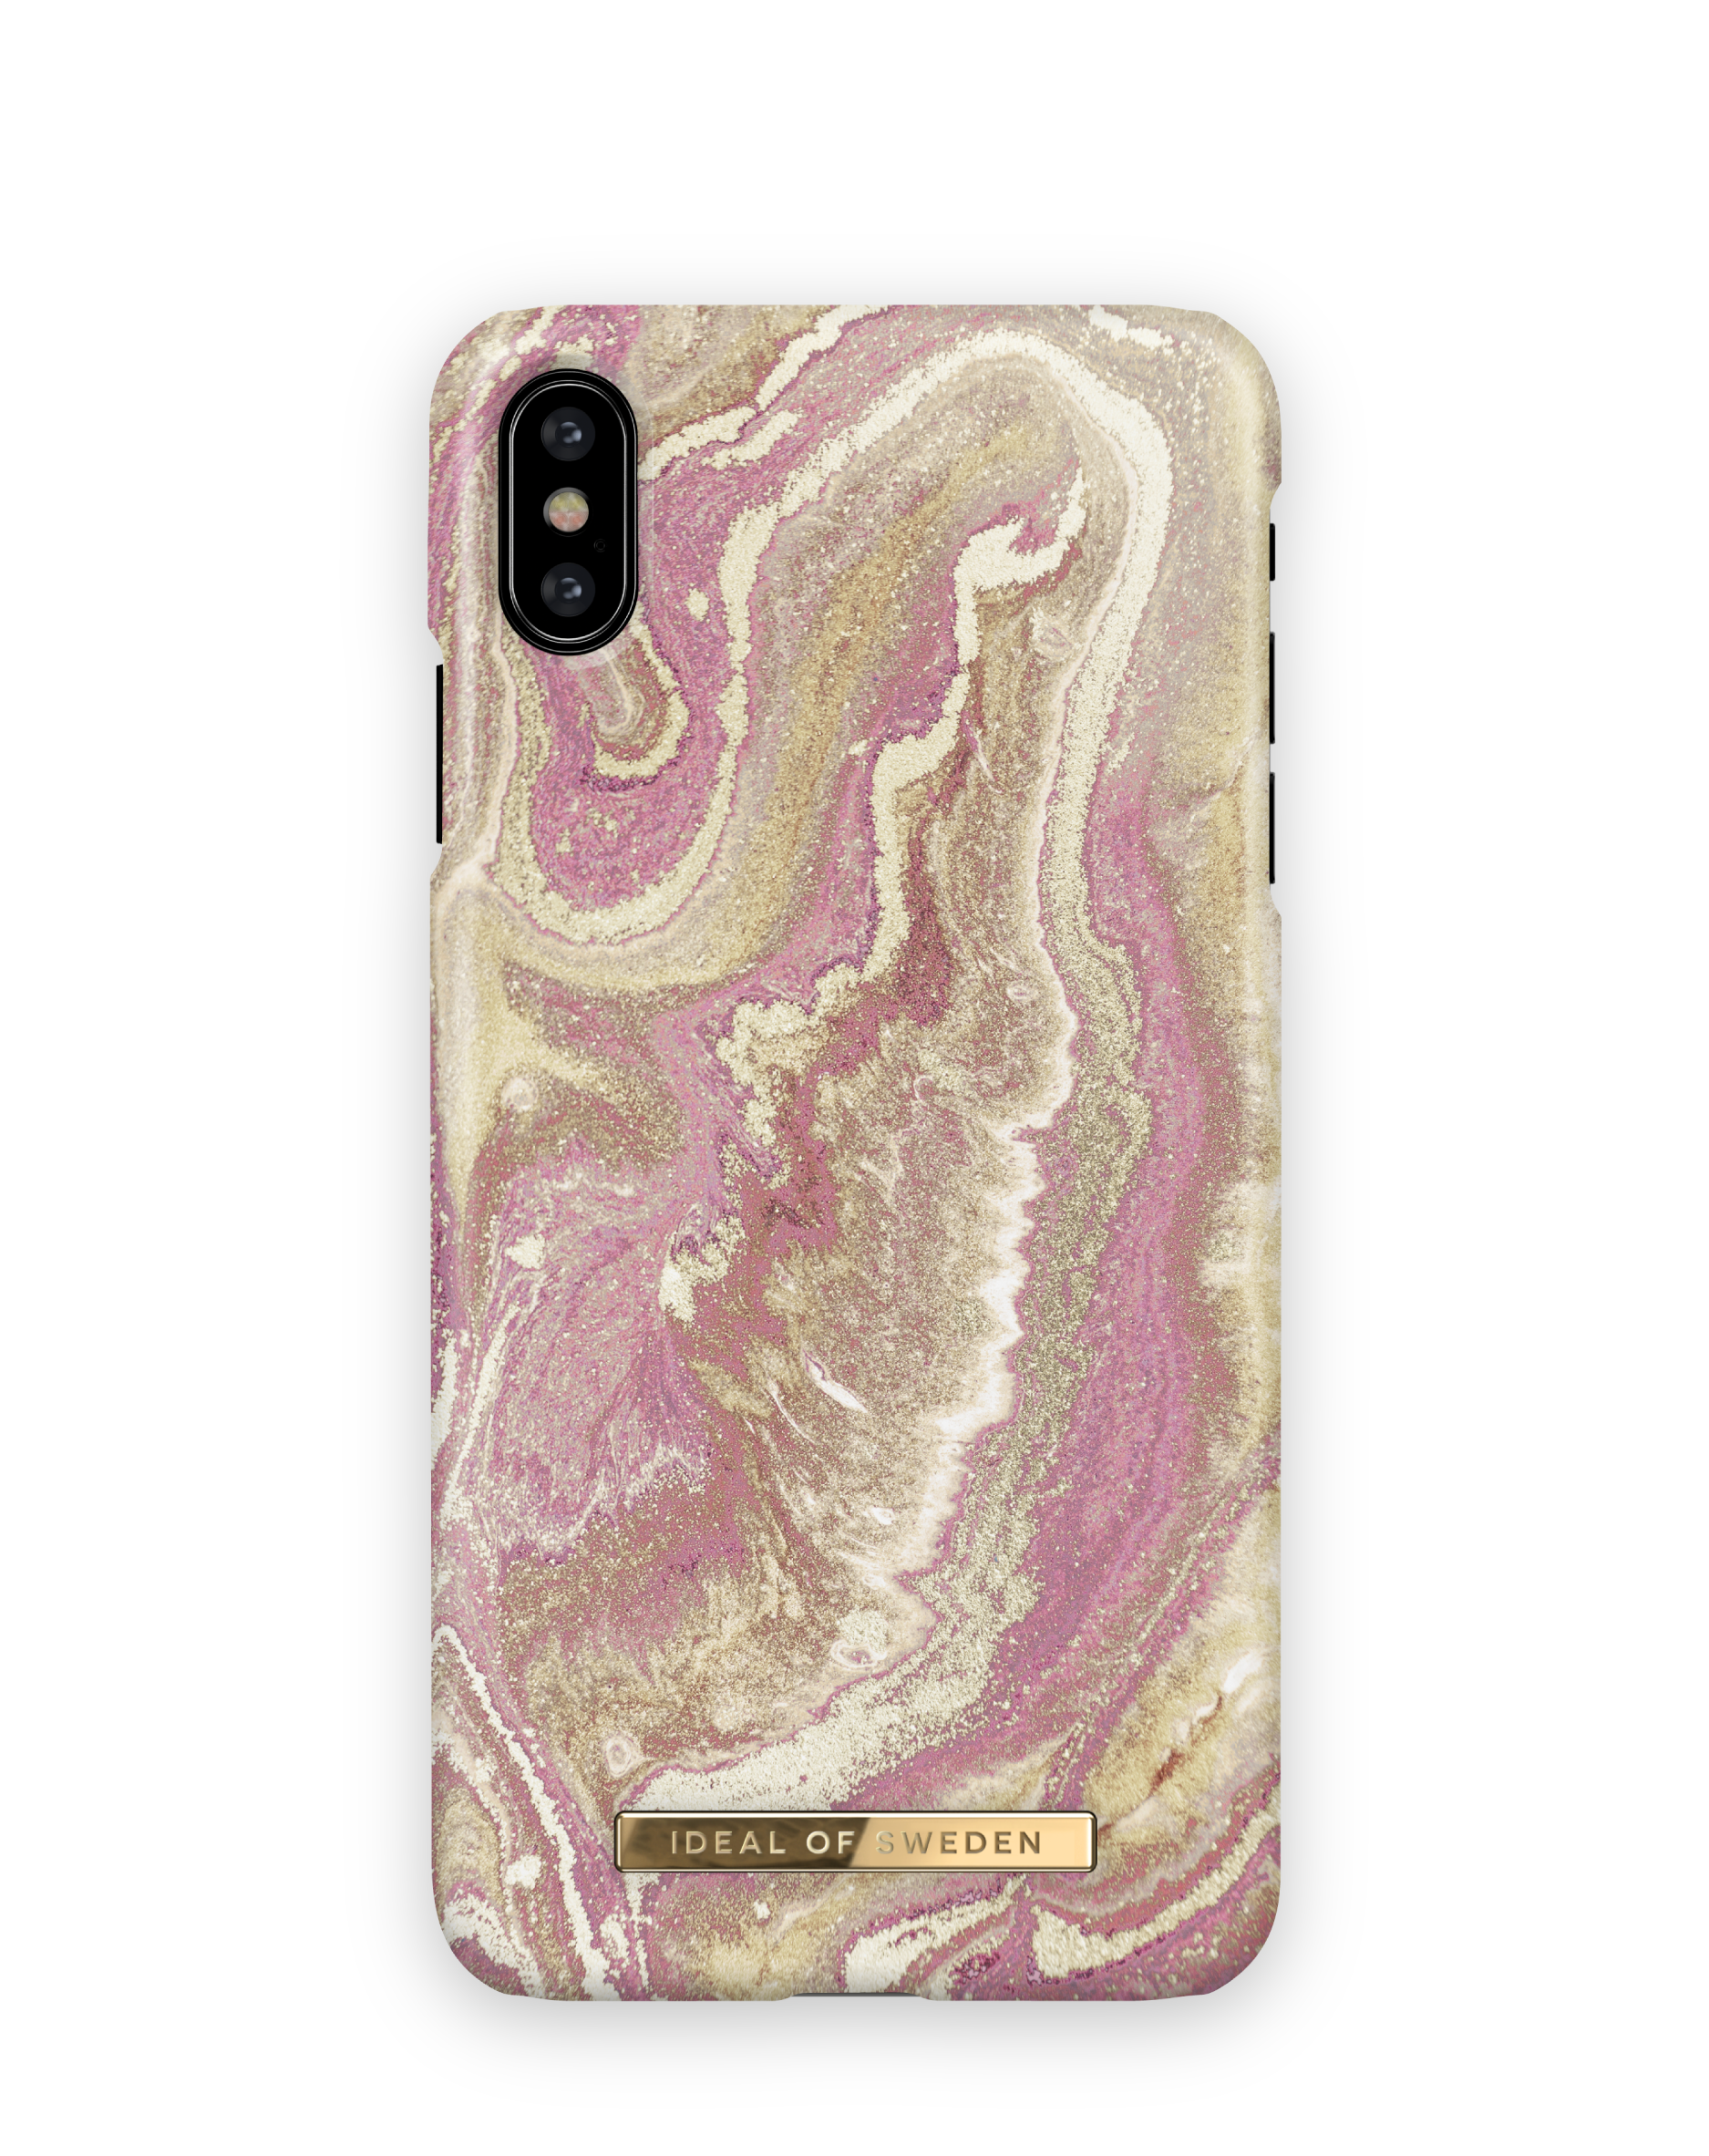 Backcover, Golden IPhone Blush X/XS, IDFCSS19-IXS-120, Marble OF Apple, SWEDEN IDEAL